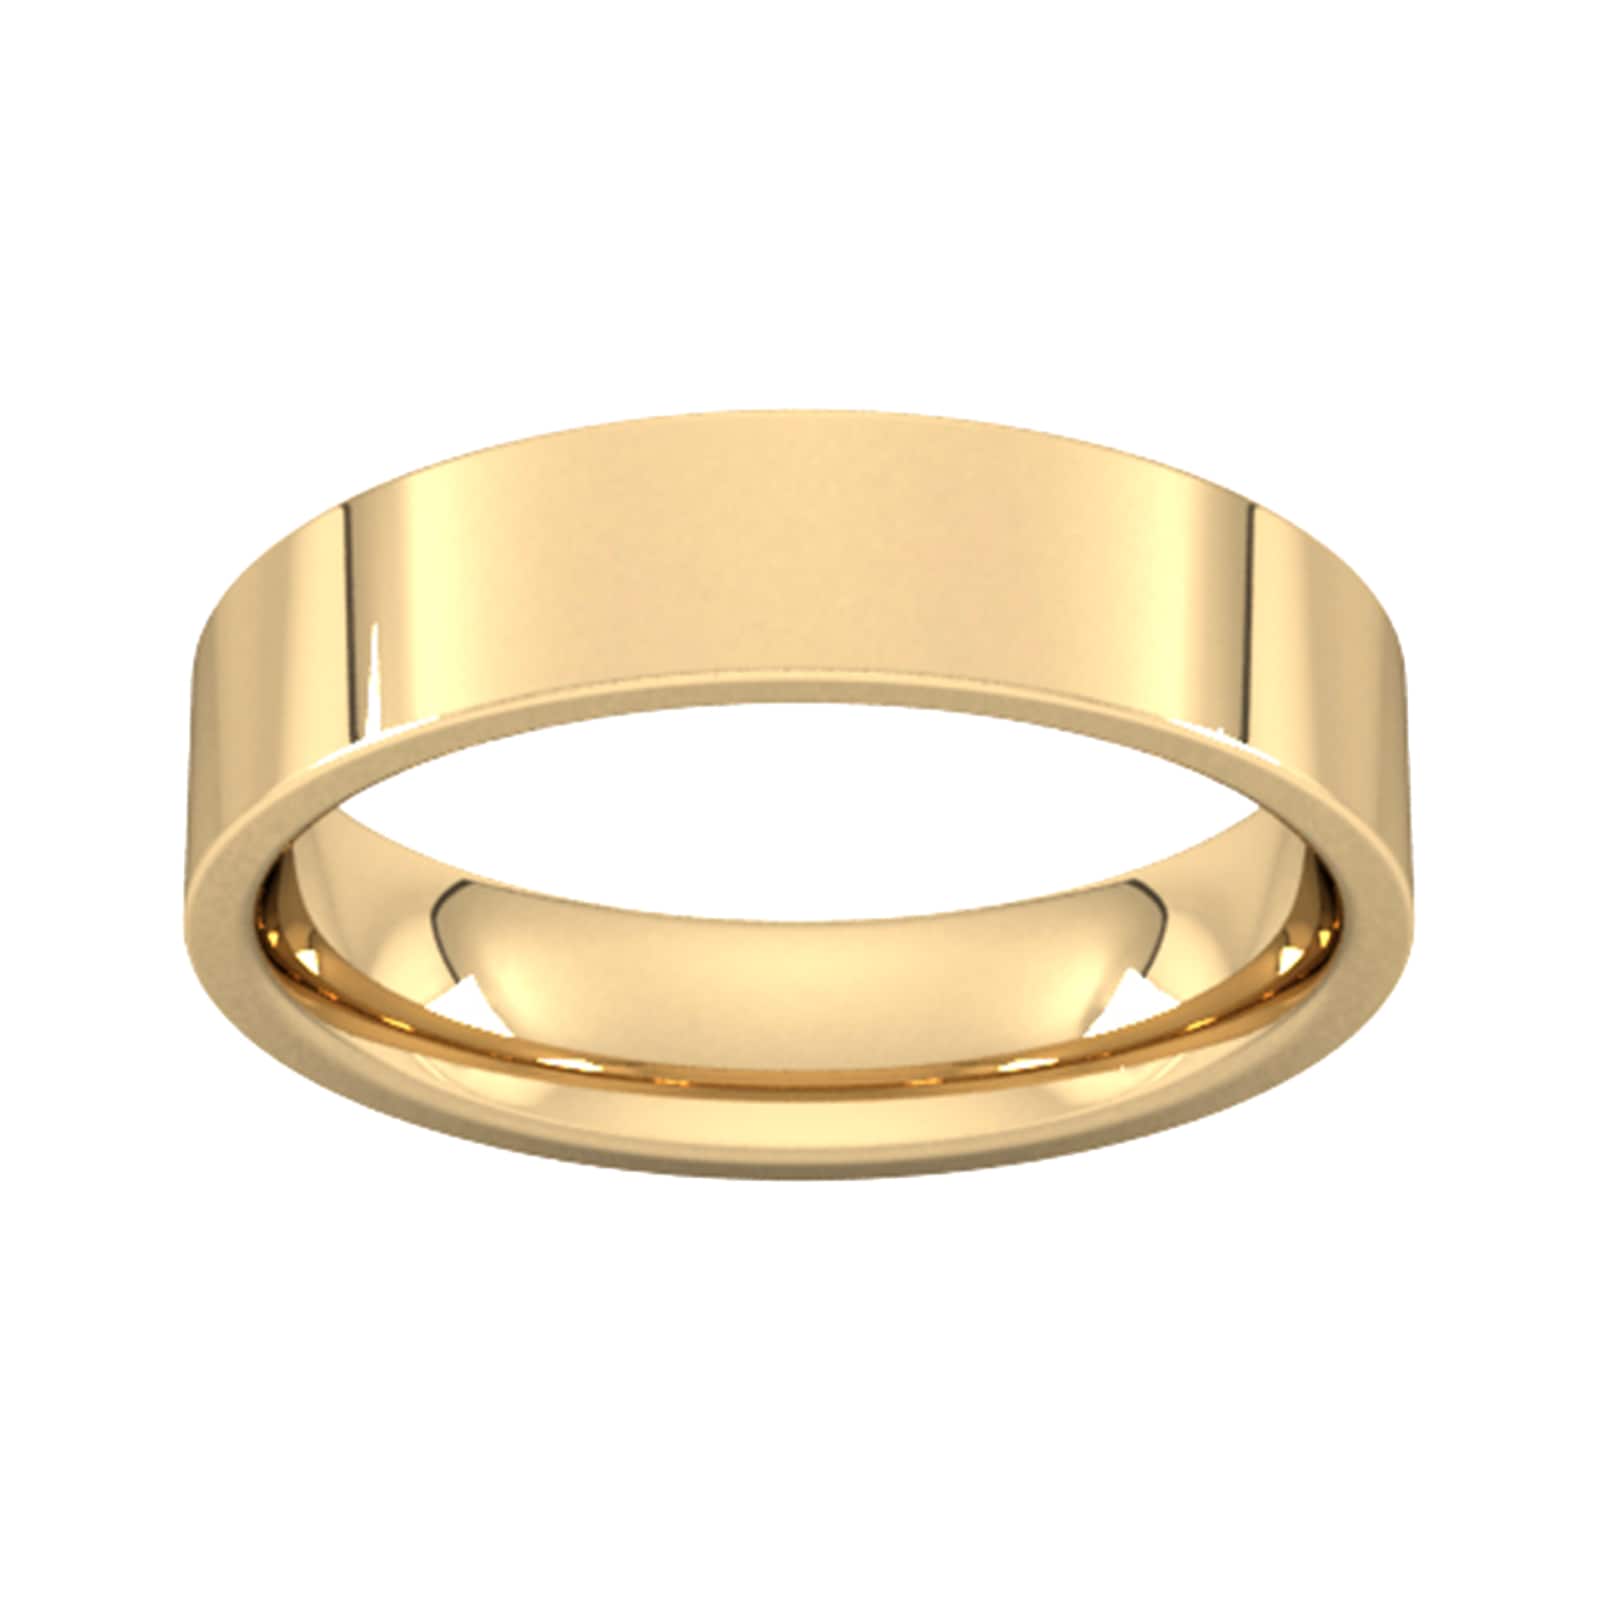 5mm Flat Court Heavy Wedding Ring In 9 Carat Yellow Gold - Ring Size R